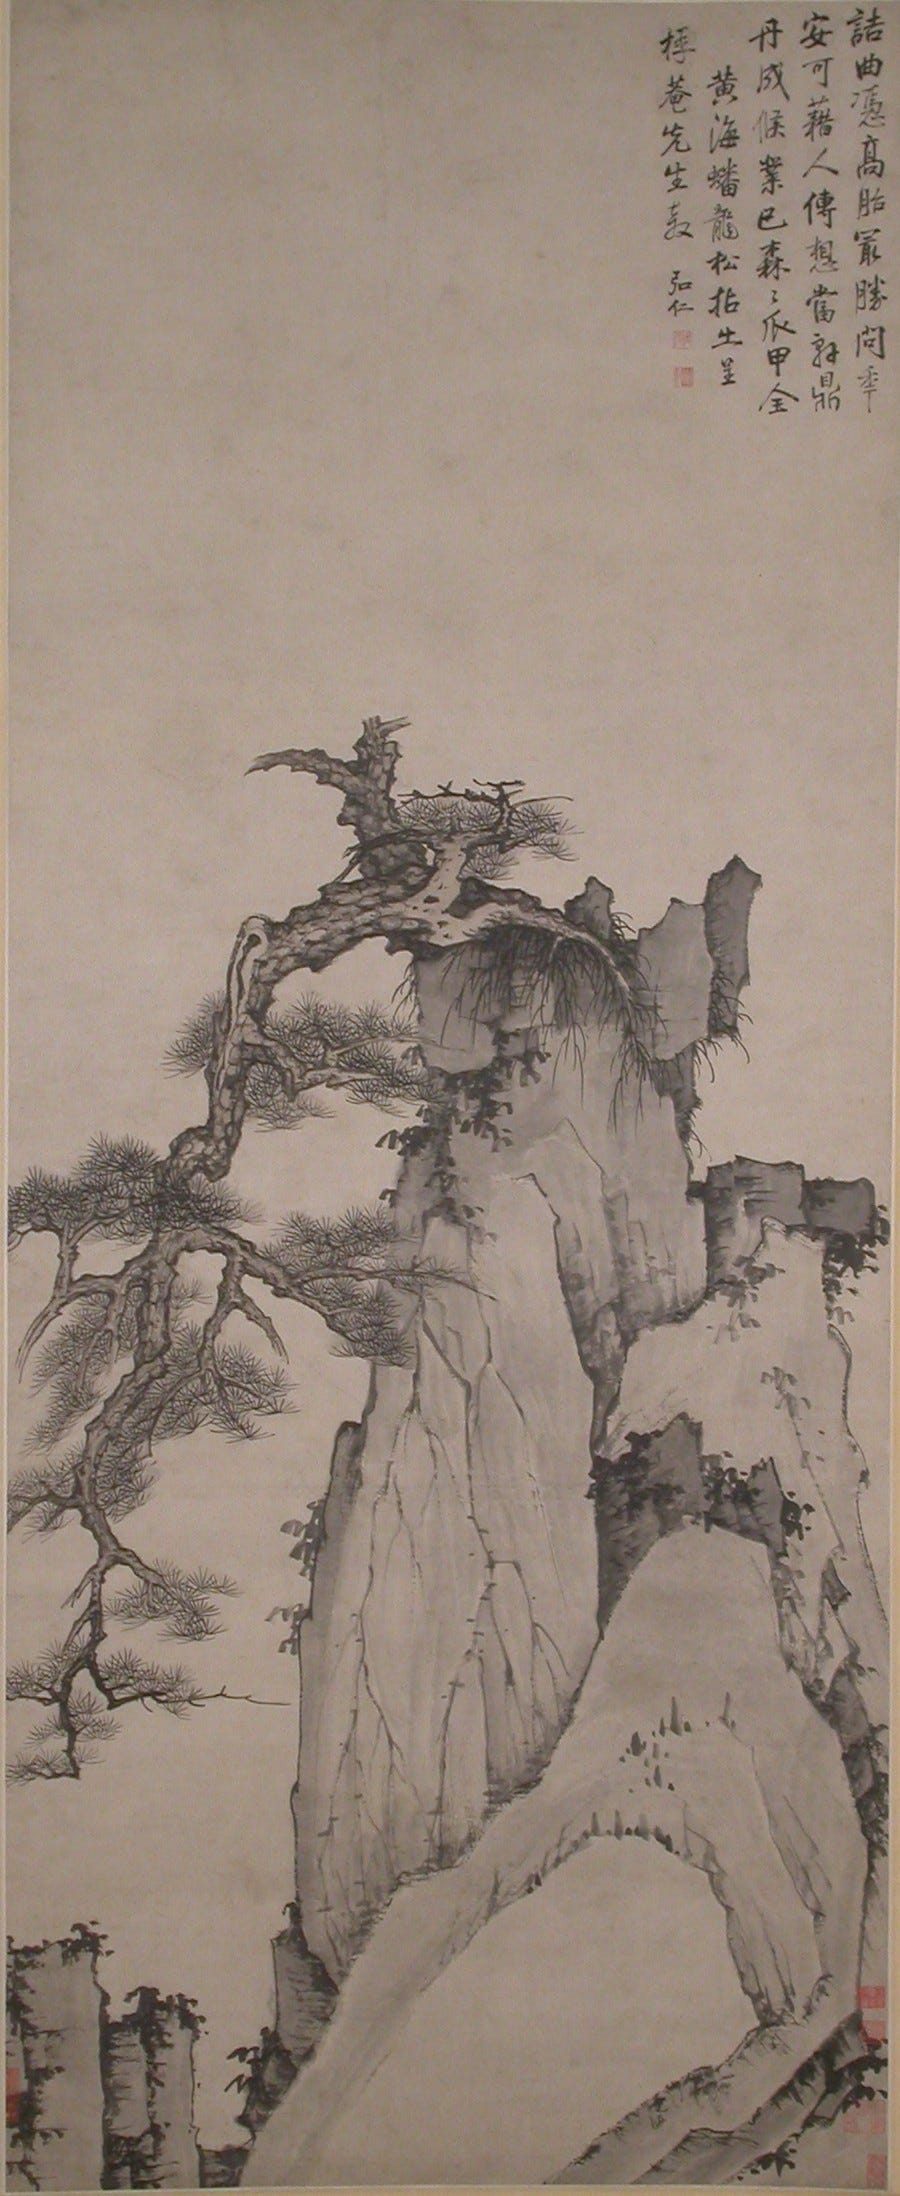 Dragon Pine on Mount Huang, Unidentified artist, Hanging scroll; ink and pale color on paper, China